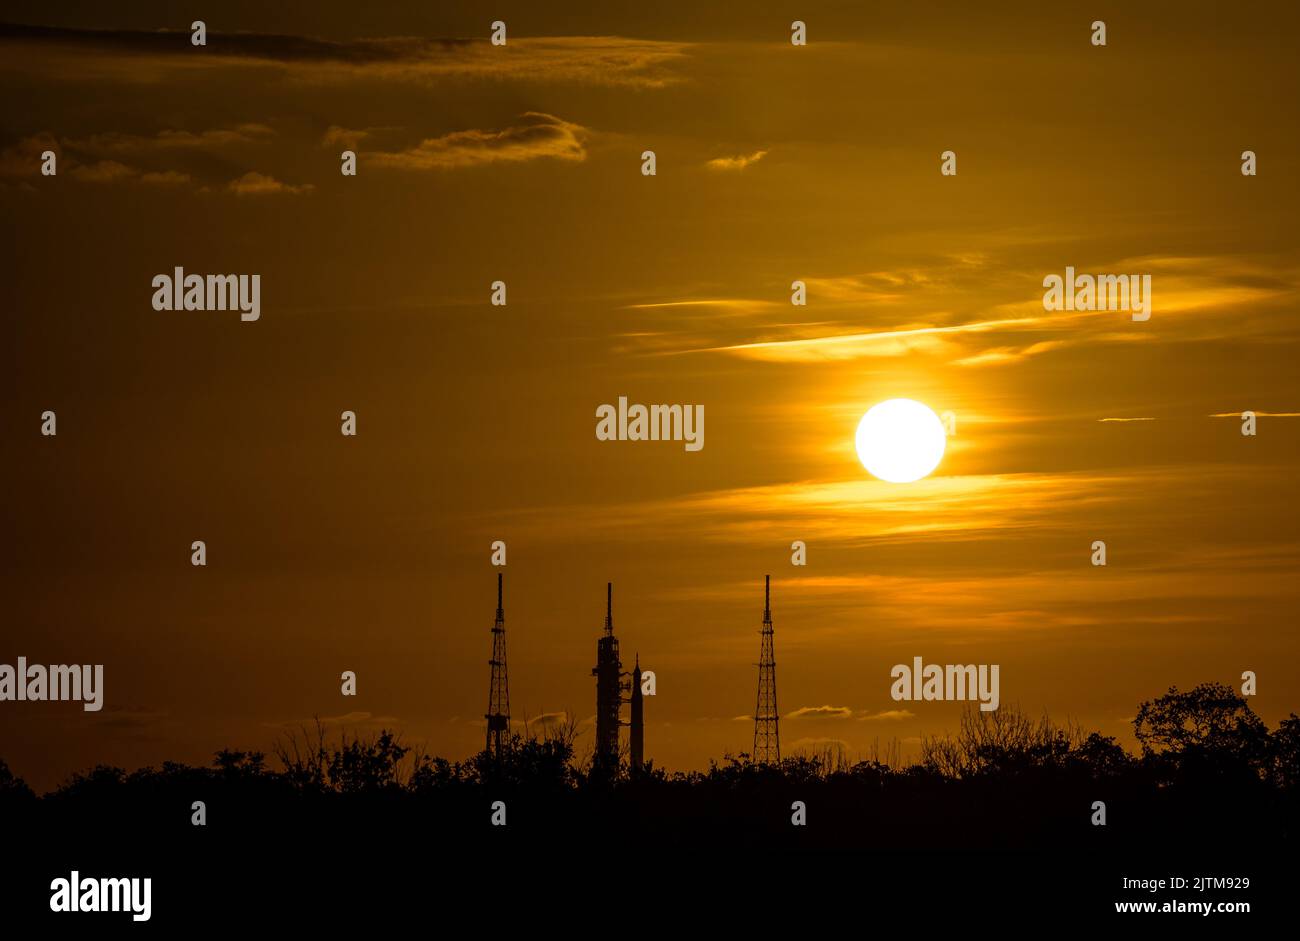 Kennedy Space Center, United States of America. 31 August, 2022. The NASA Space Launch System rocket with the Orion spacecraft is silhouetted by the sunrise on Launch Complex 39B at the Kennedy Space Center, August 31, 2022, in Cape Canaveral, Florida. The countdown for the un-crewed flight test has been rescheduled for September 3rd following a problem with the fuel system caused an extended delay. Credit: Bill Ingalls/NASA/Alamy Live News Stock Photo